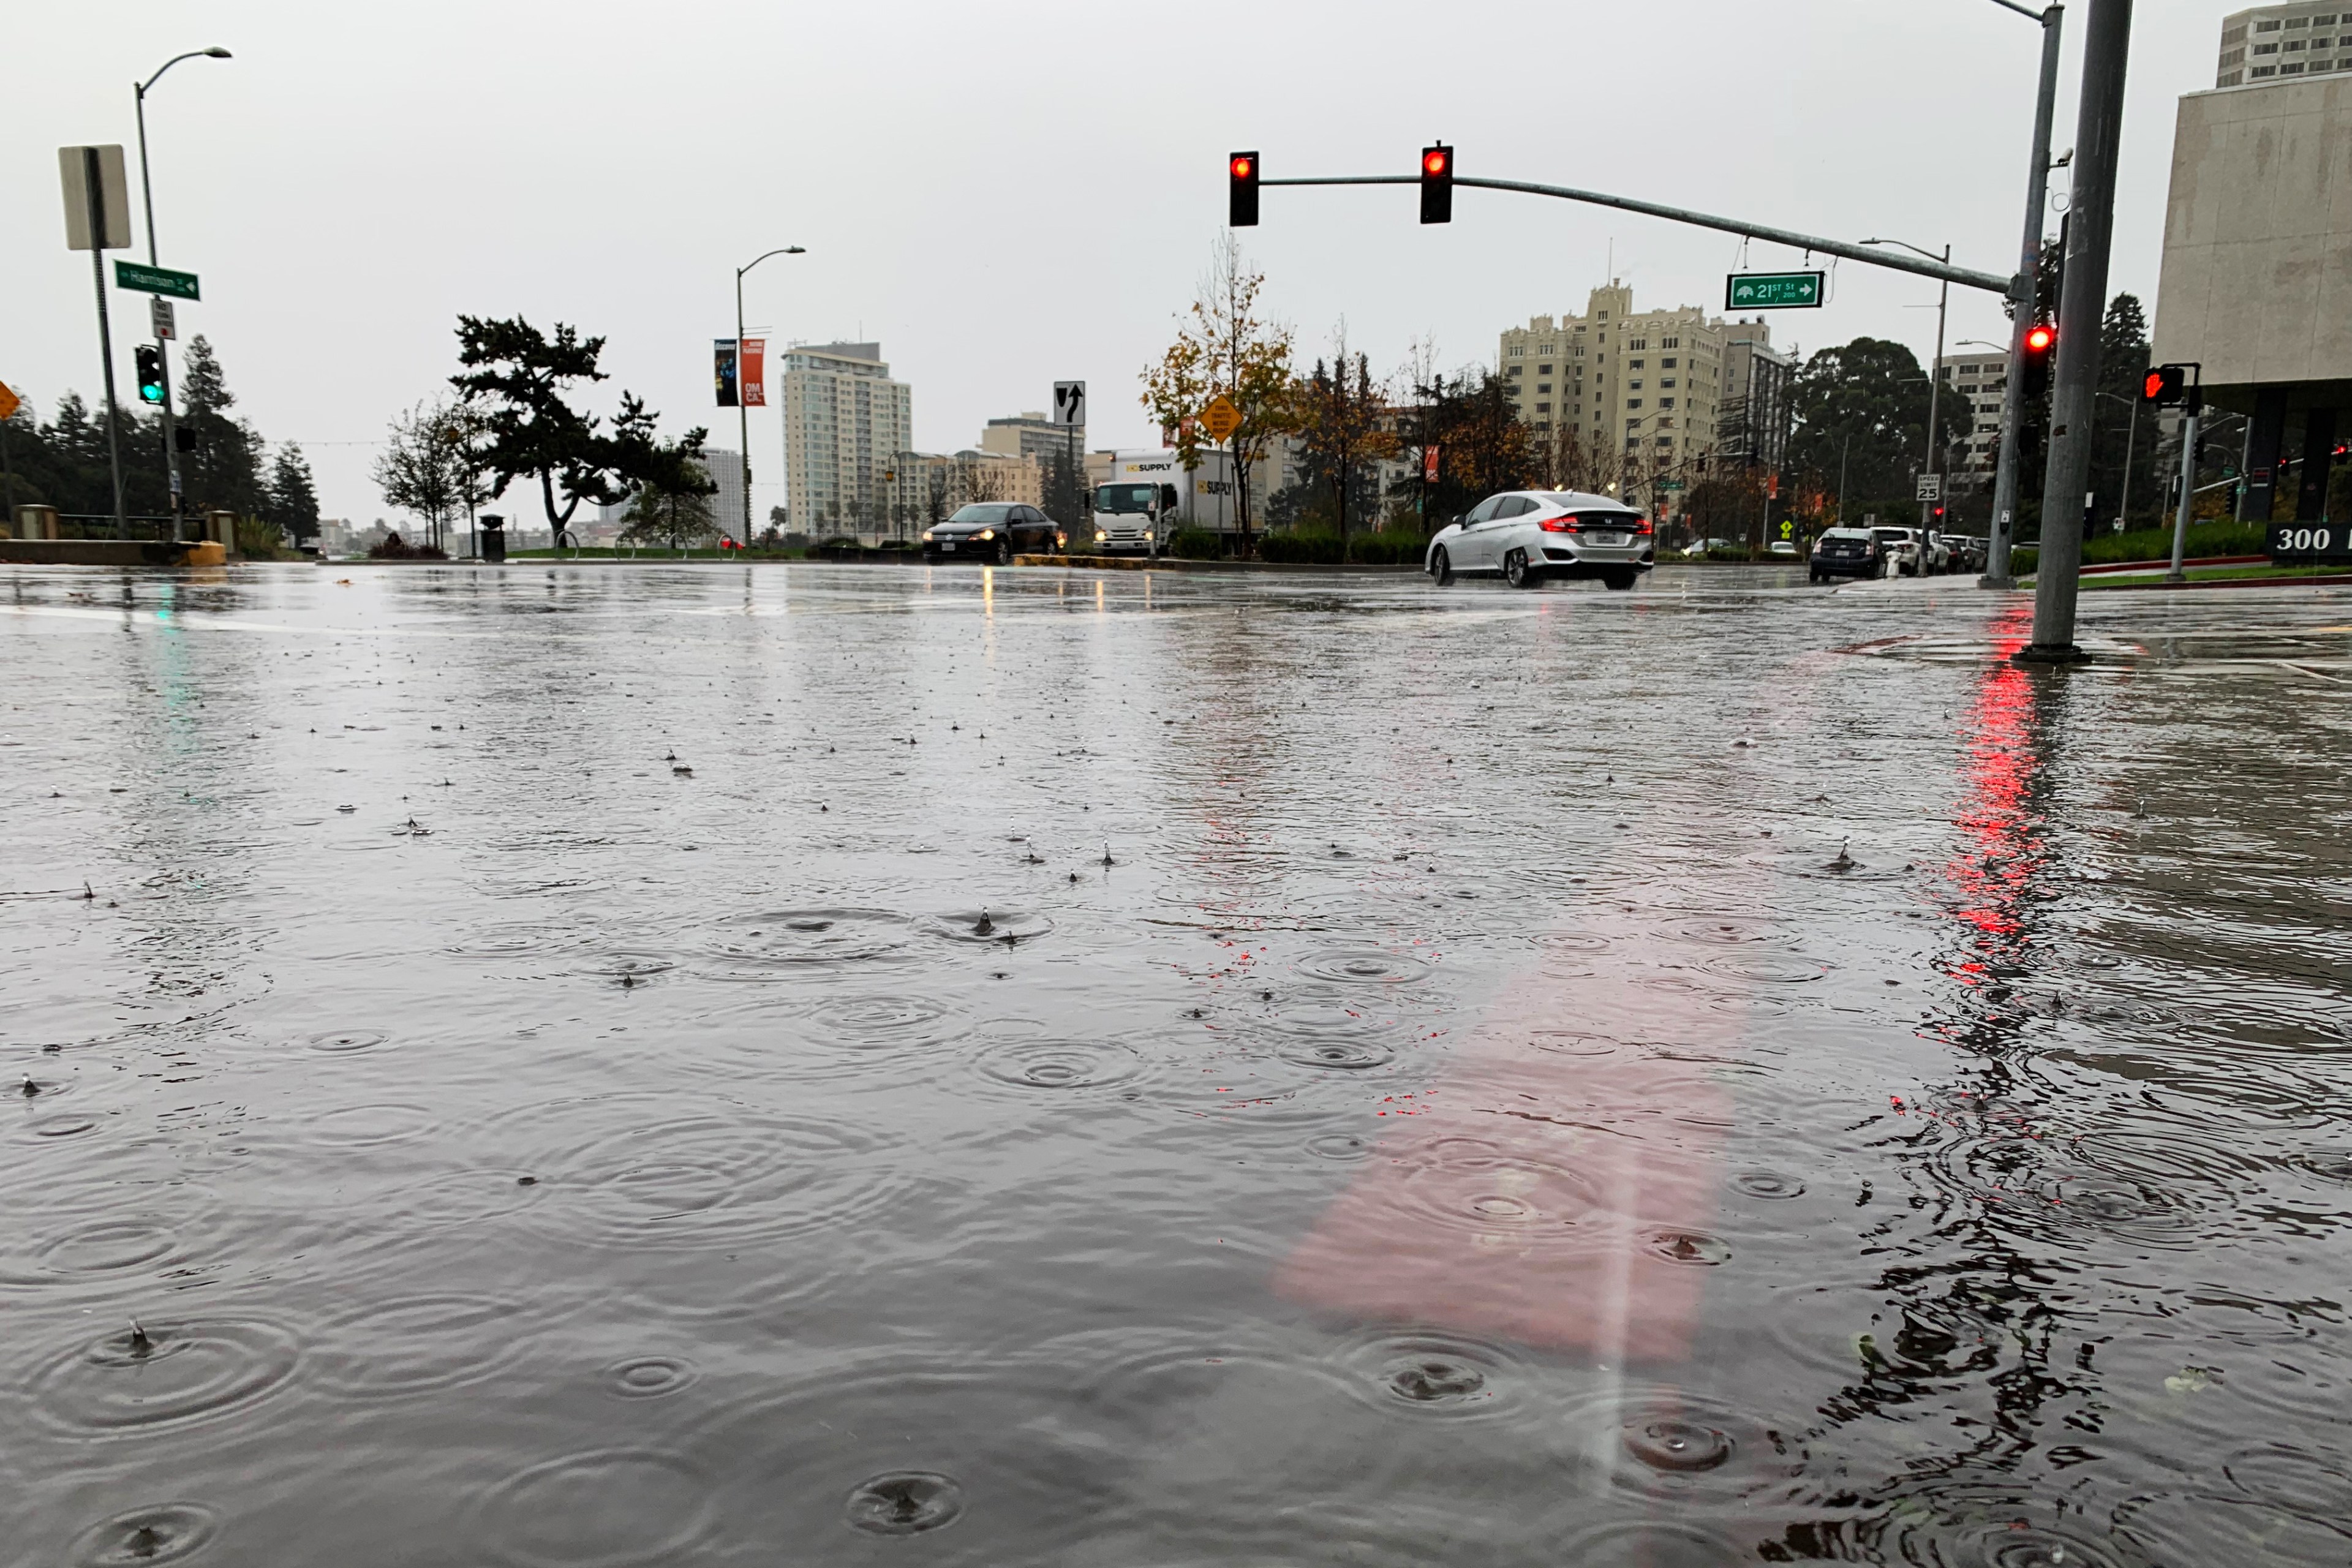 Rainwater gathers to create moderate flooding at the intersection.